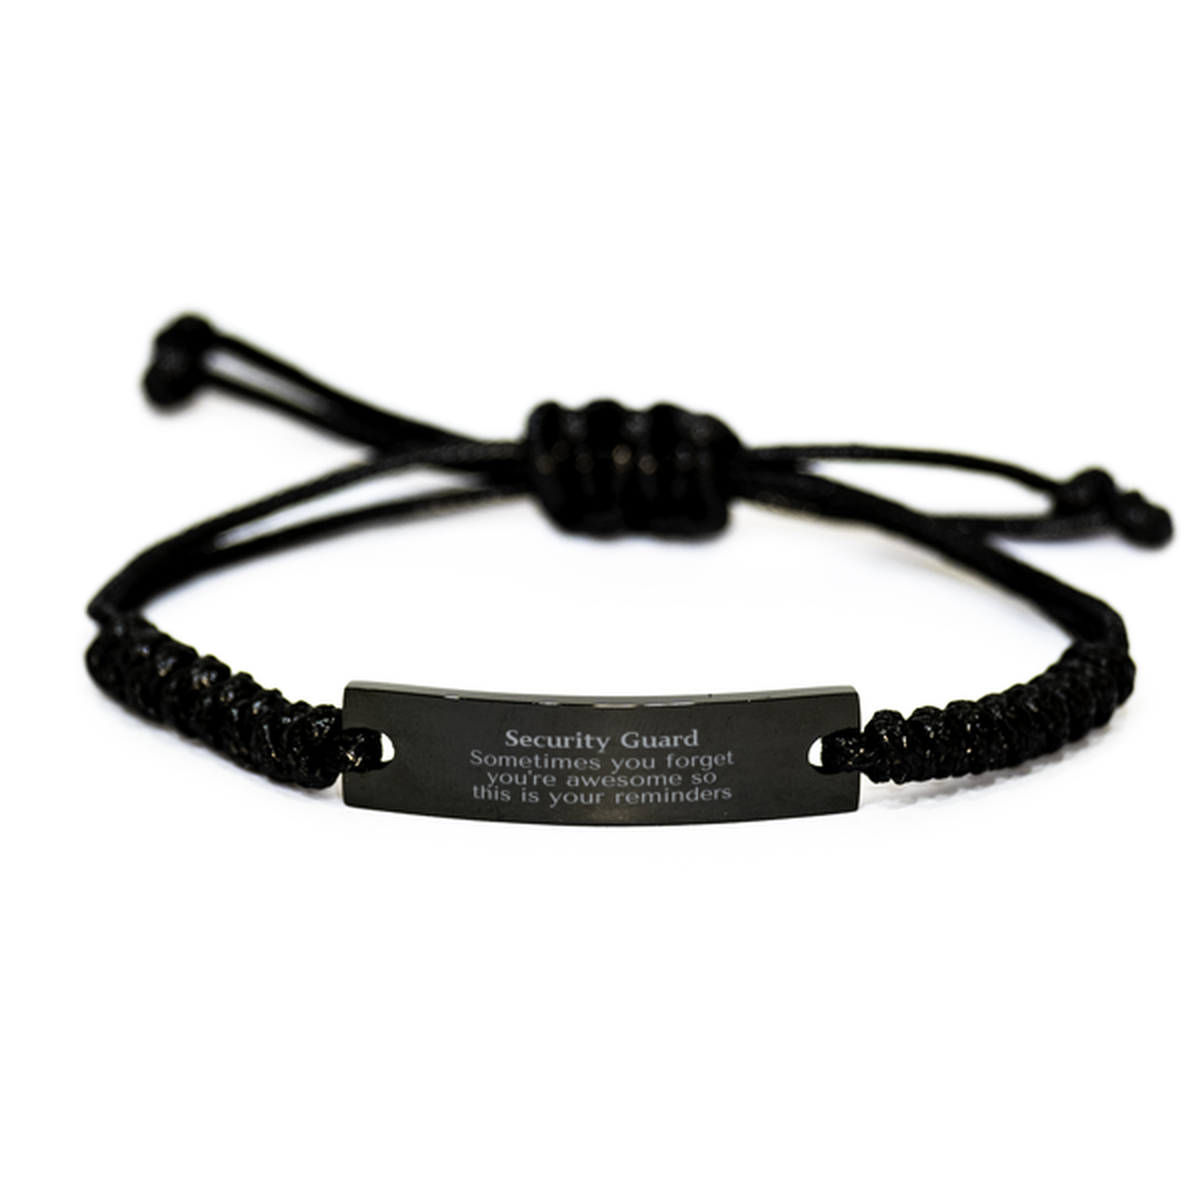 Sentimental Security Guard Black Rope Bracelet, Security Guard Sometimes you forget you're awesome so this is your reminders, Graduation Christmas Birthday Gifts for Security Guard, Men, Women, Coworkers